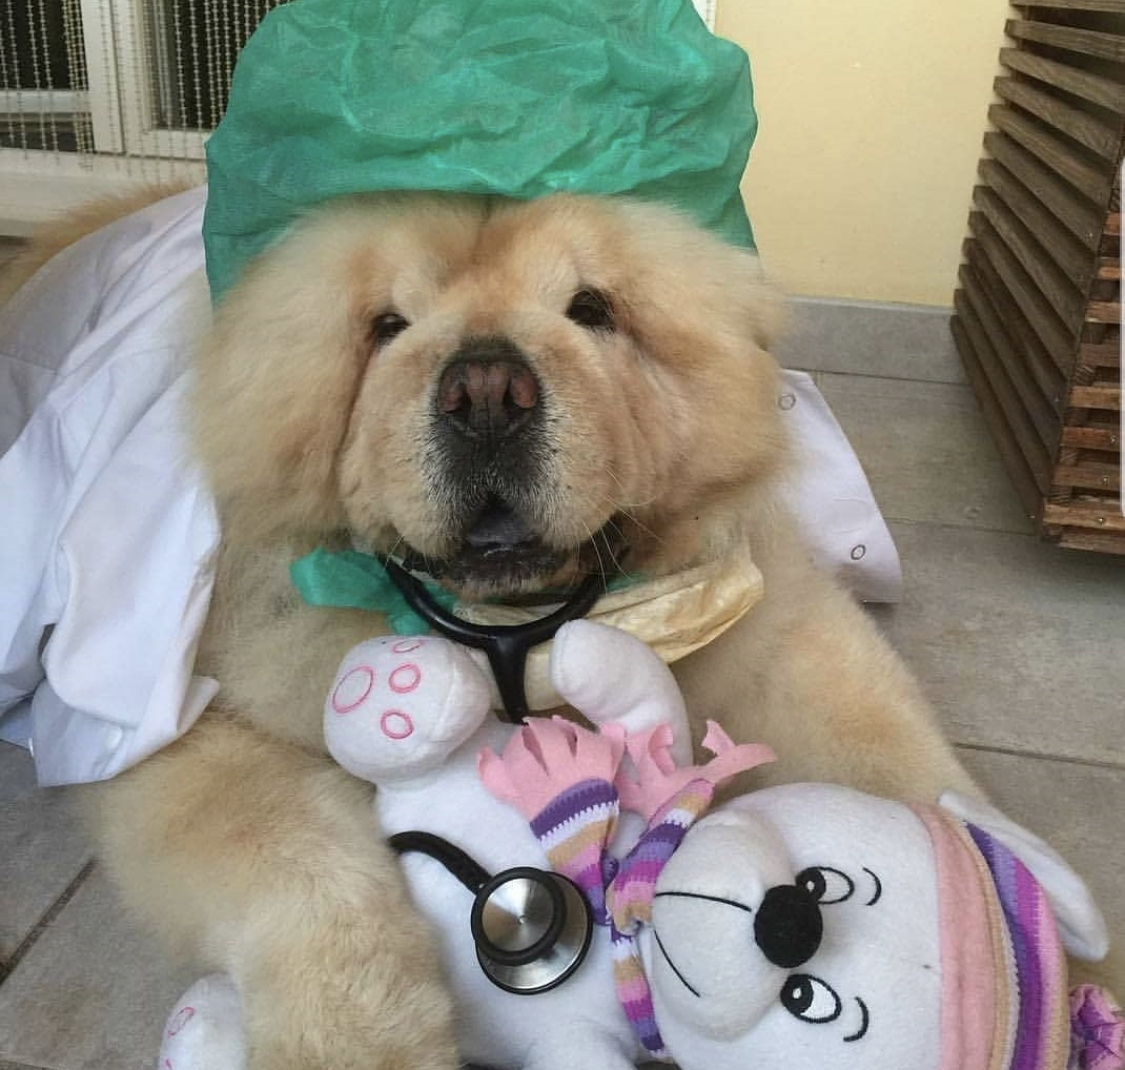 A Chow Chow wearing a doctor outfit while lying on the pavement with its stuffed toy